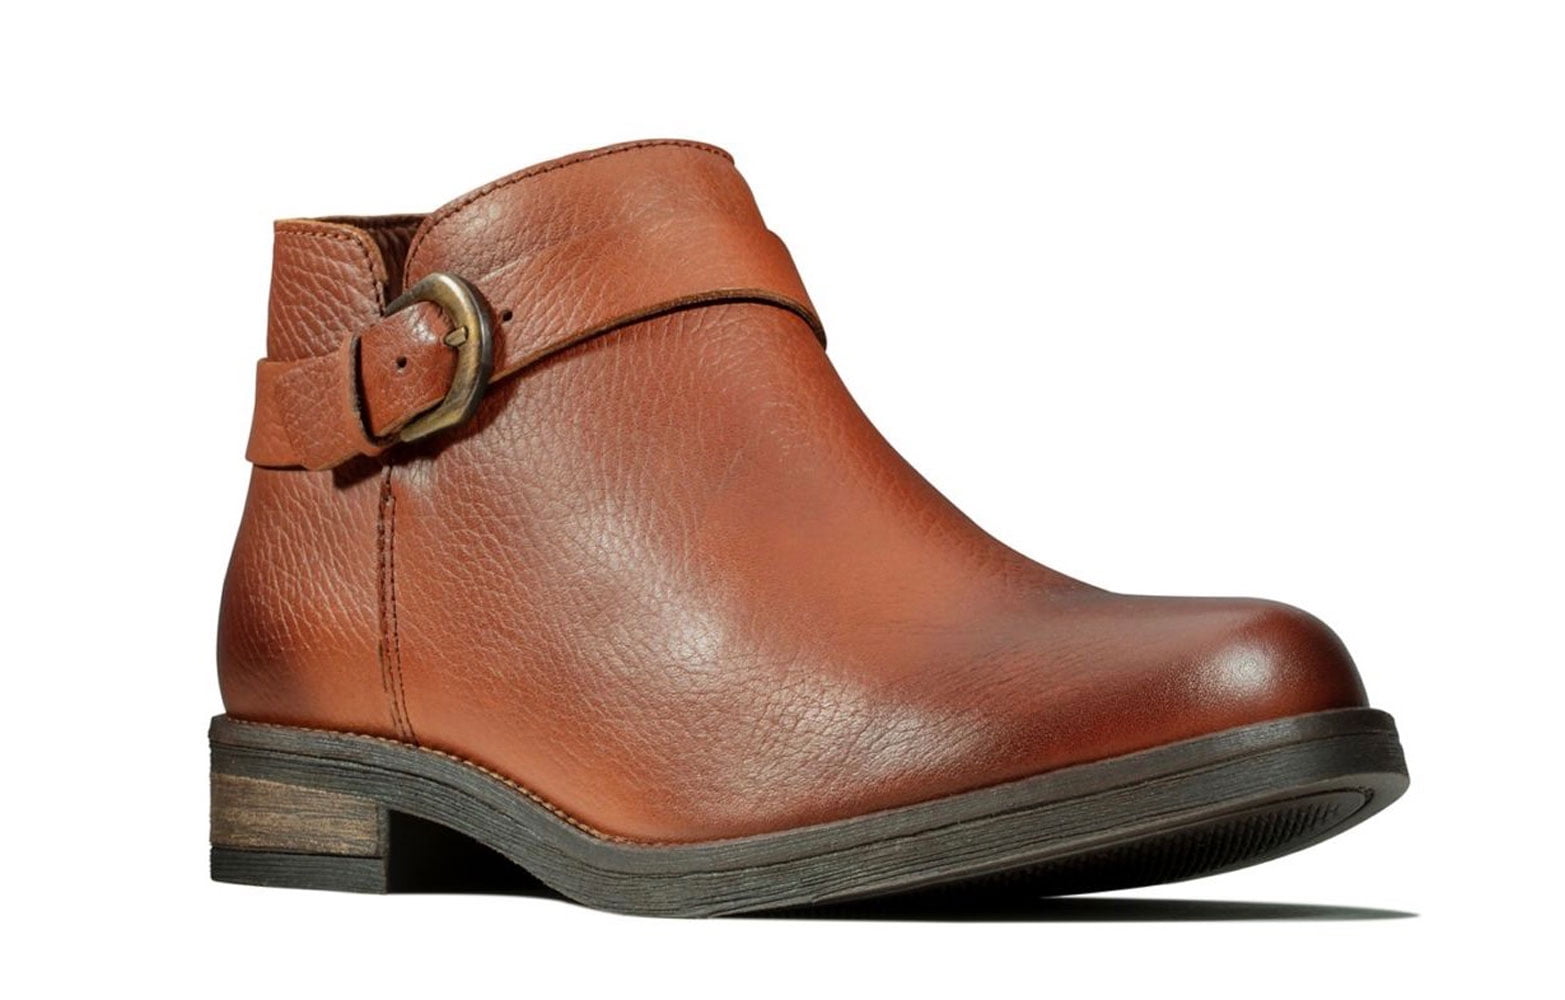 clarks tan leather boots